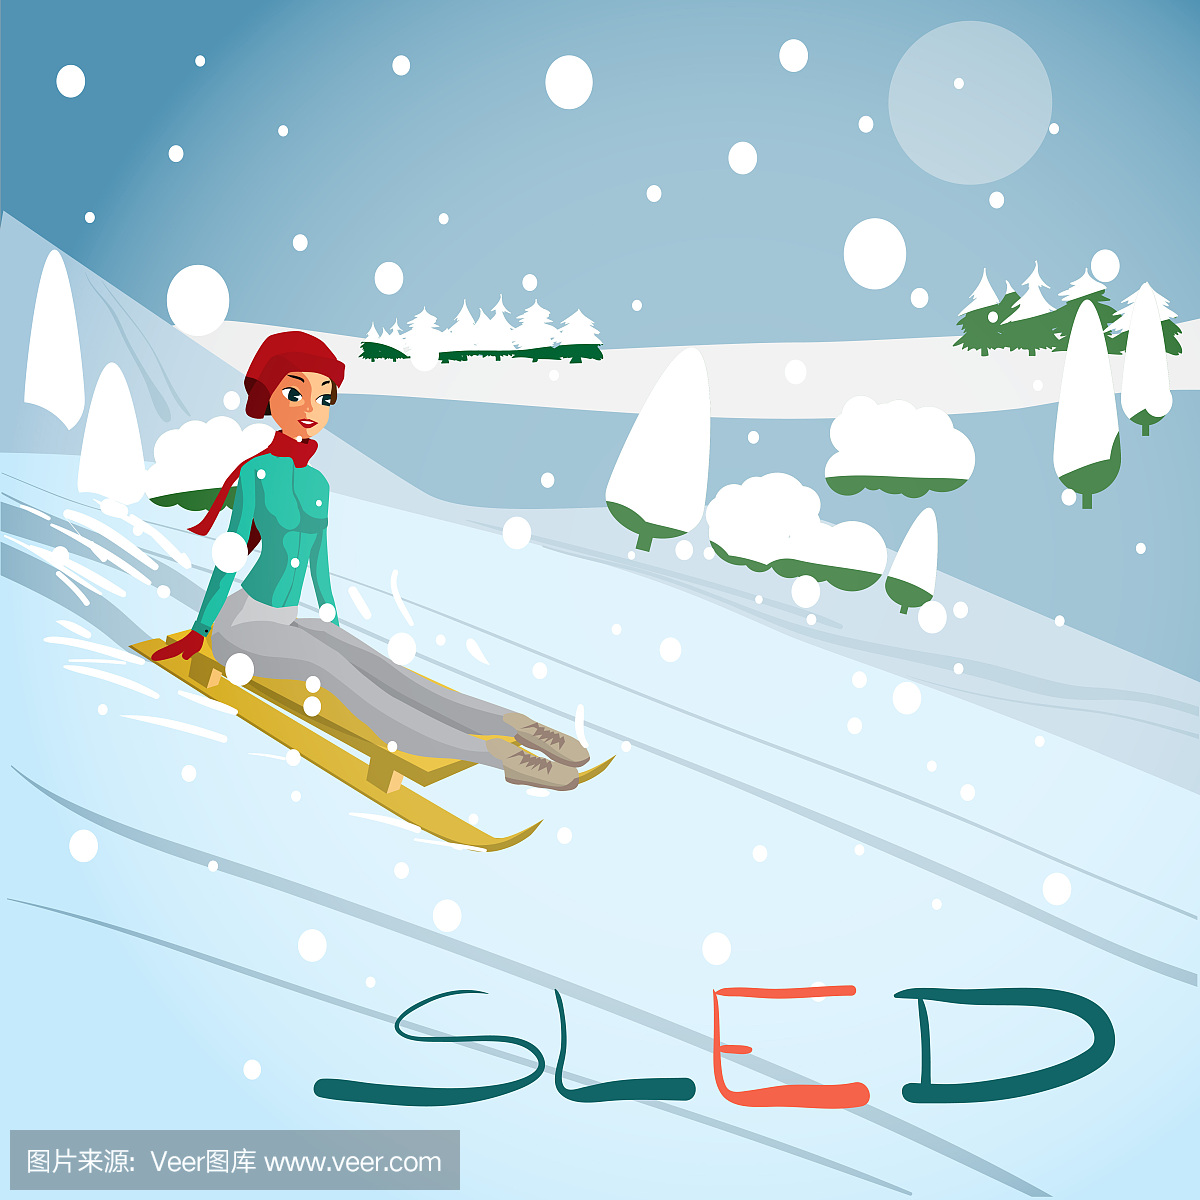 ard background. Woman rolling downhill on a sled